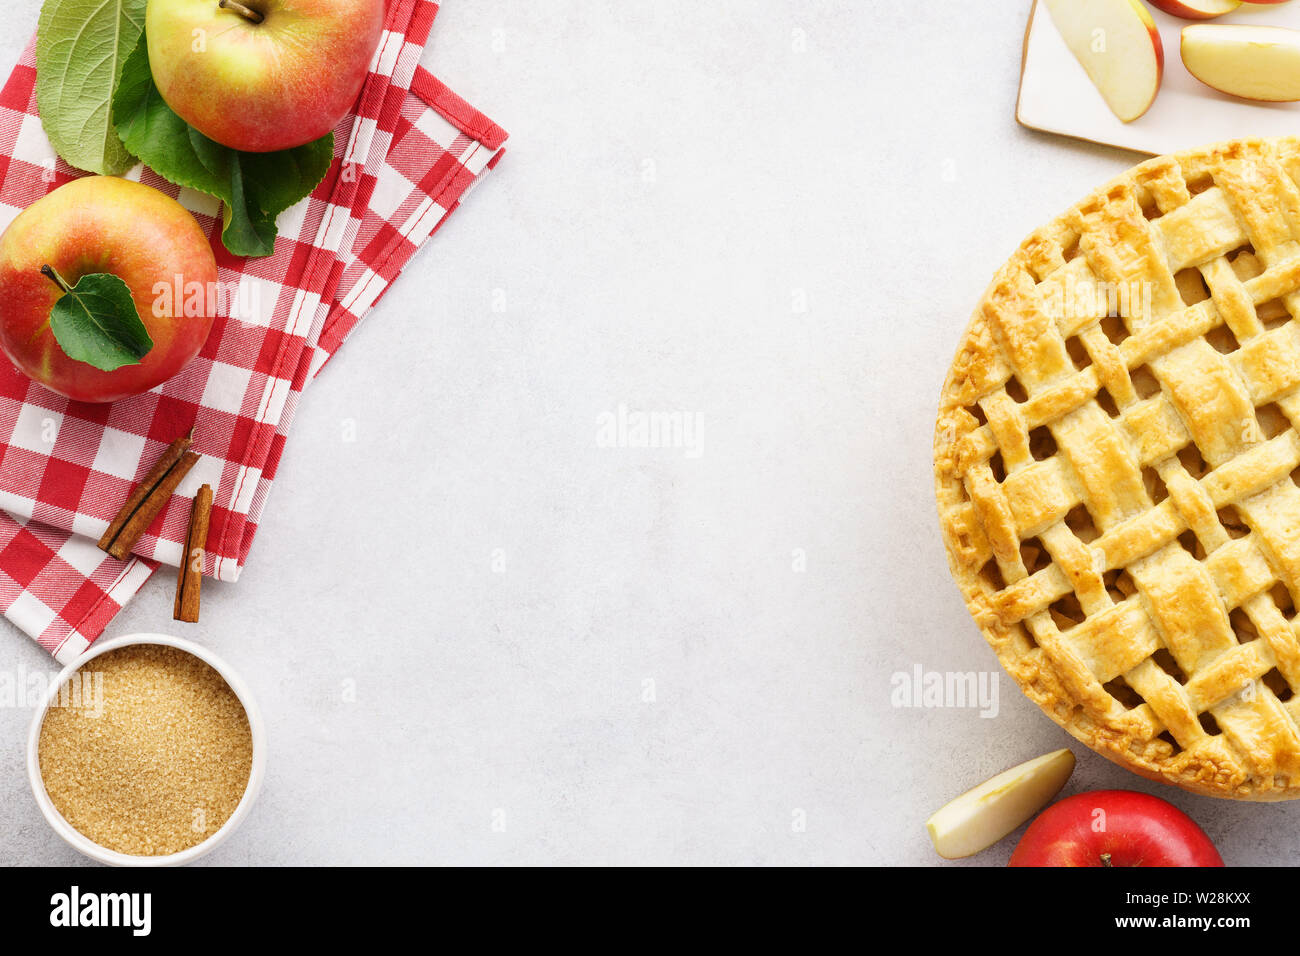 Homemade apple pie with lattice top and ingredients on gray table. Traditional American seasonal pastry background. Copy space. Stock Photo